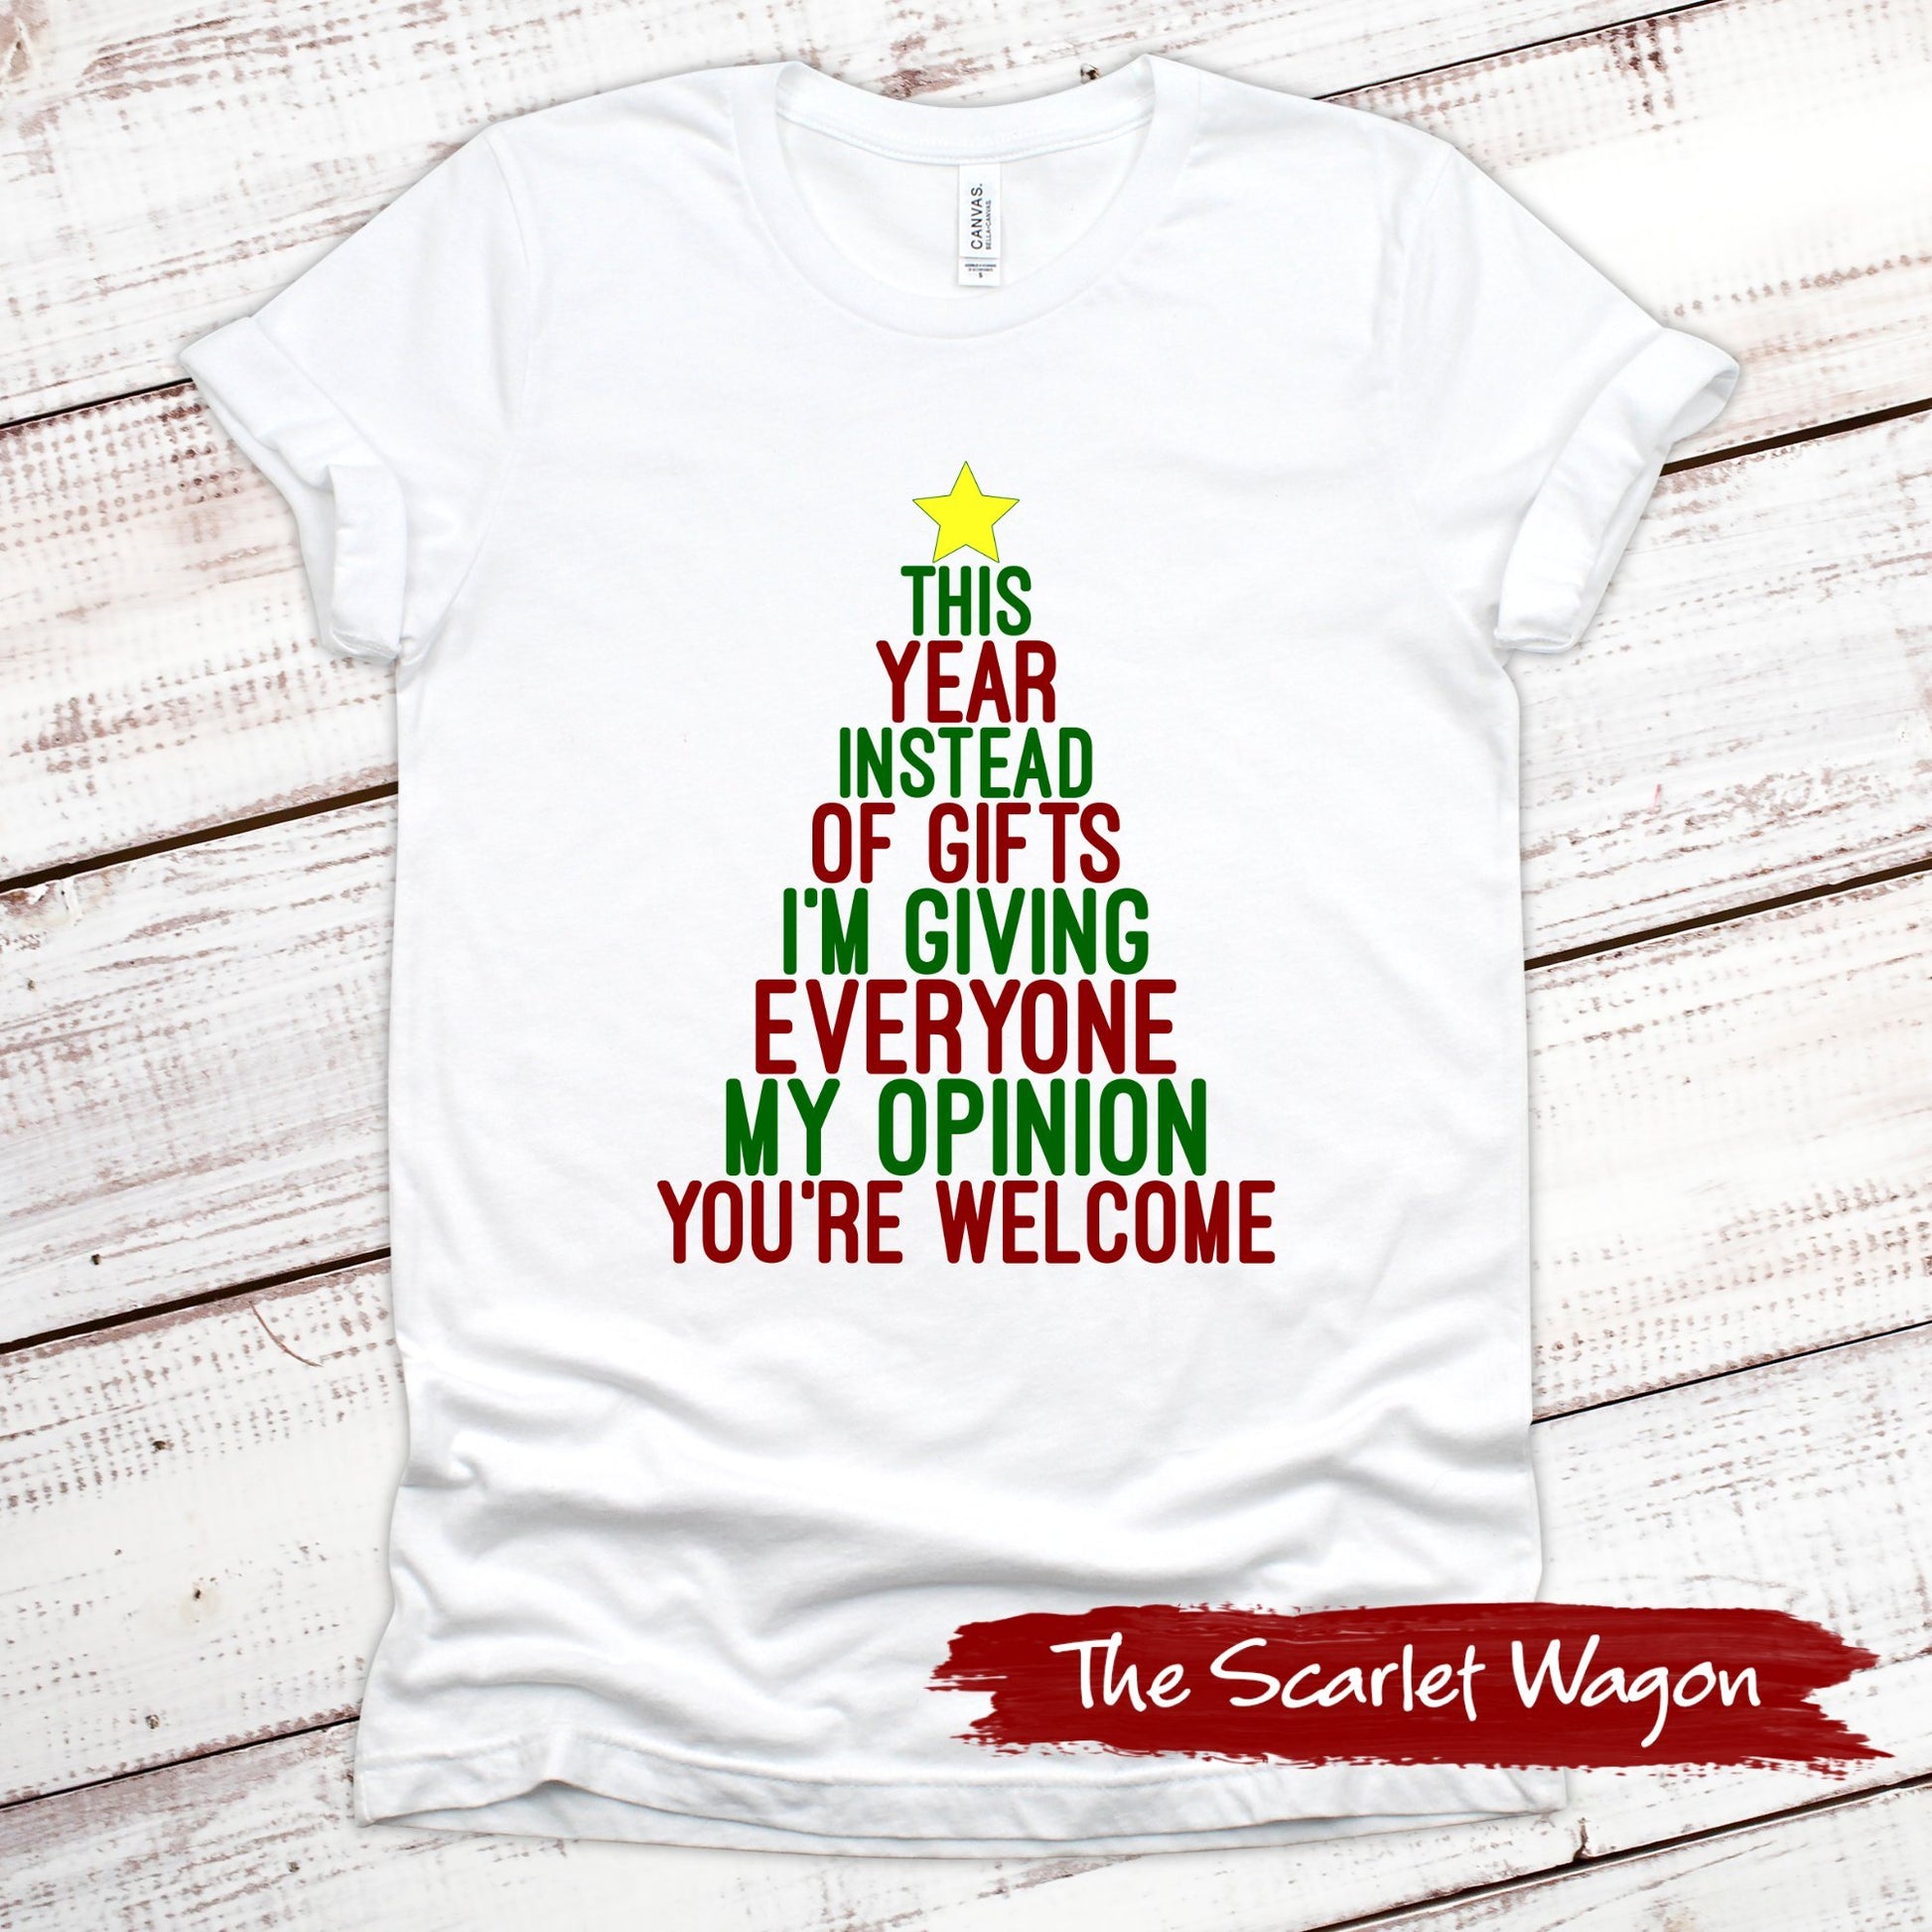 Instead of Gifts I'm Giving My Opinion Christmas Shirt Scarlet Wagon White XS 